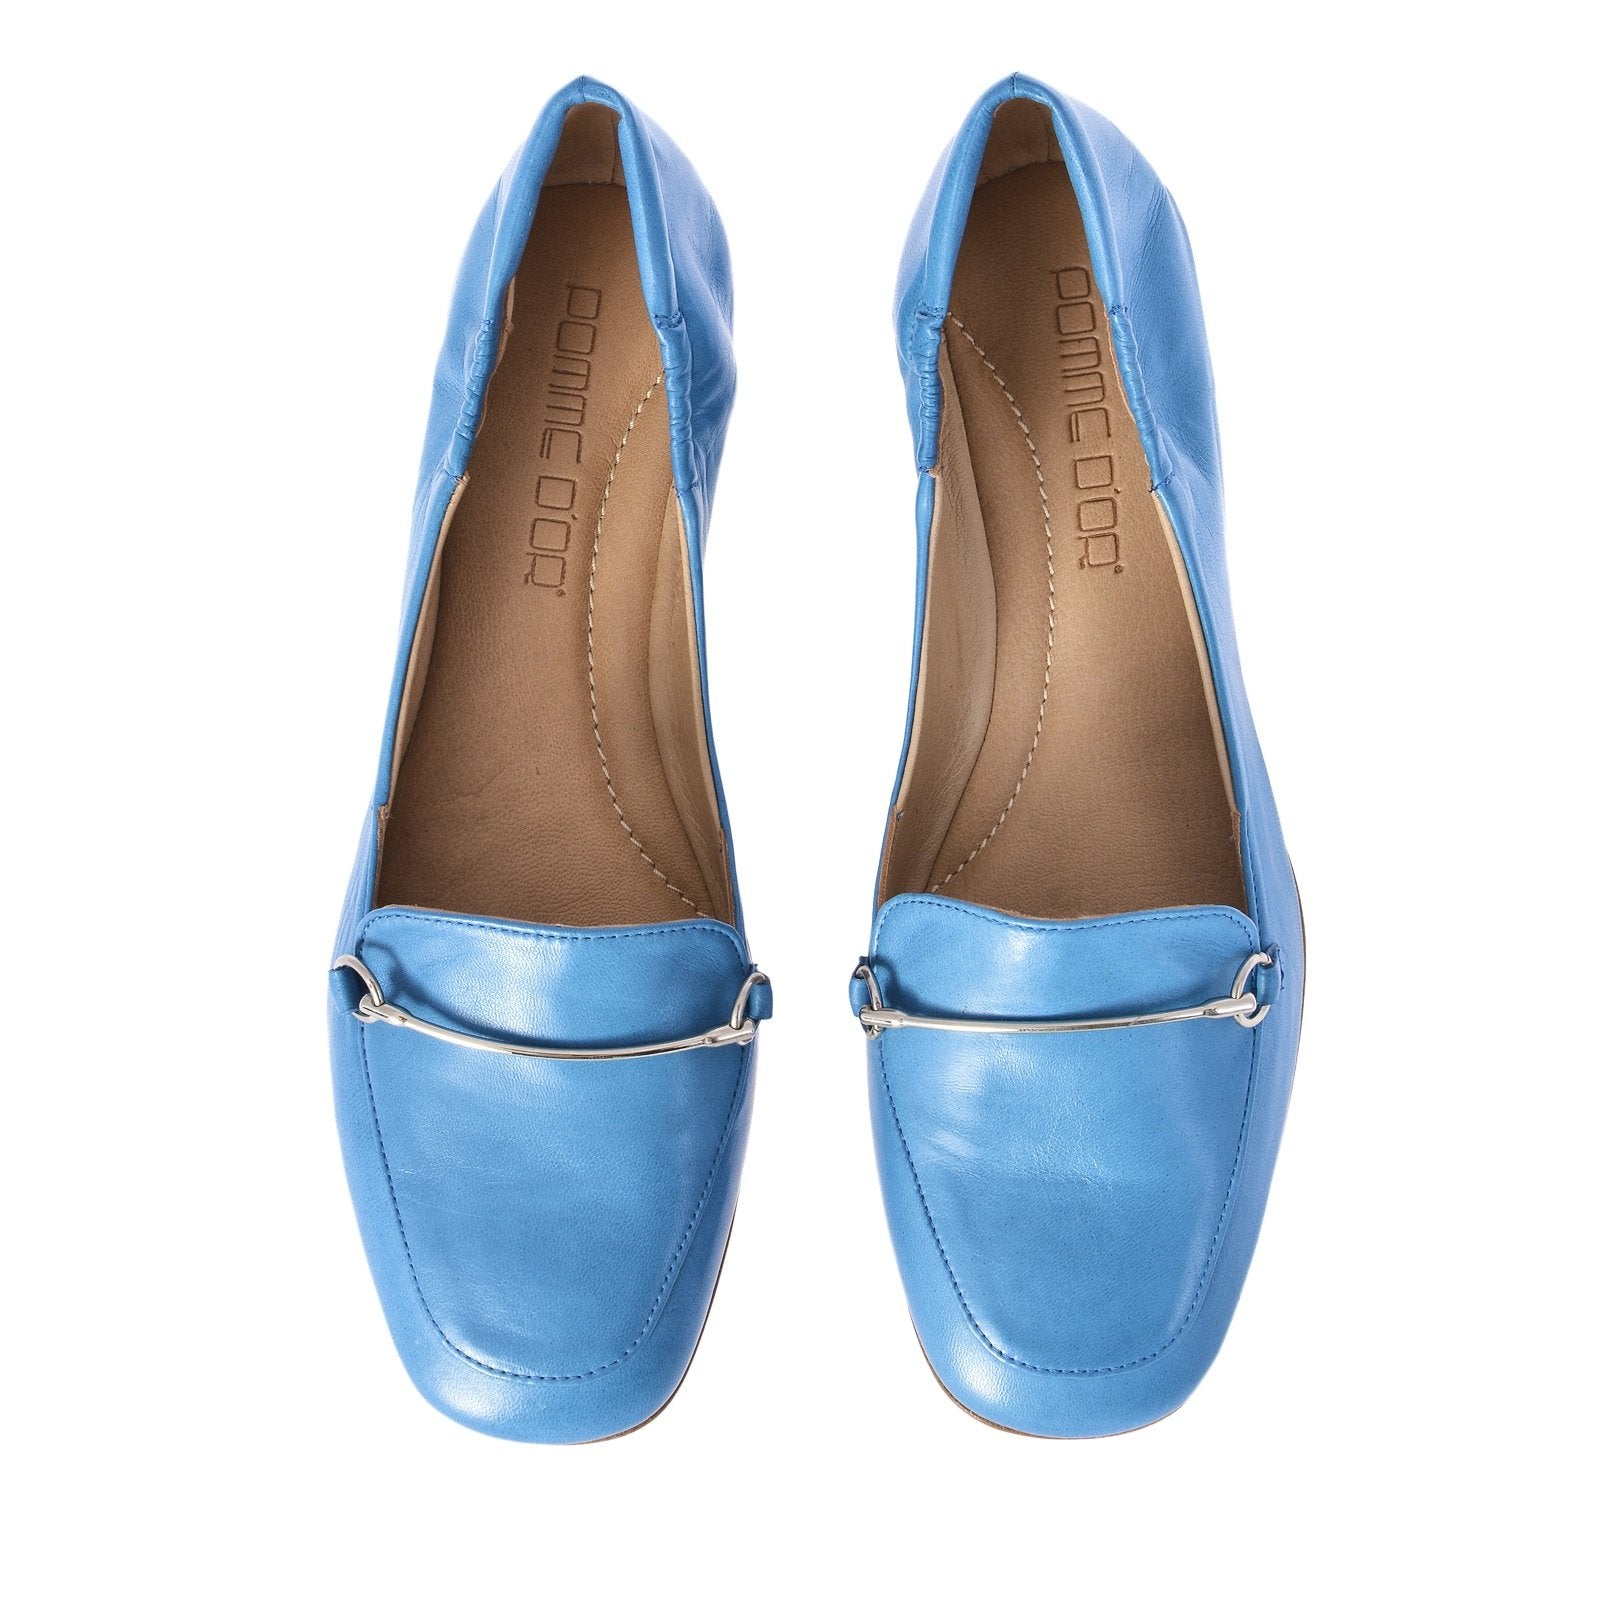 Lena Light Blue Leather Loafers Flats 1144PUNICE - 4